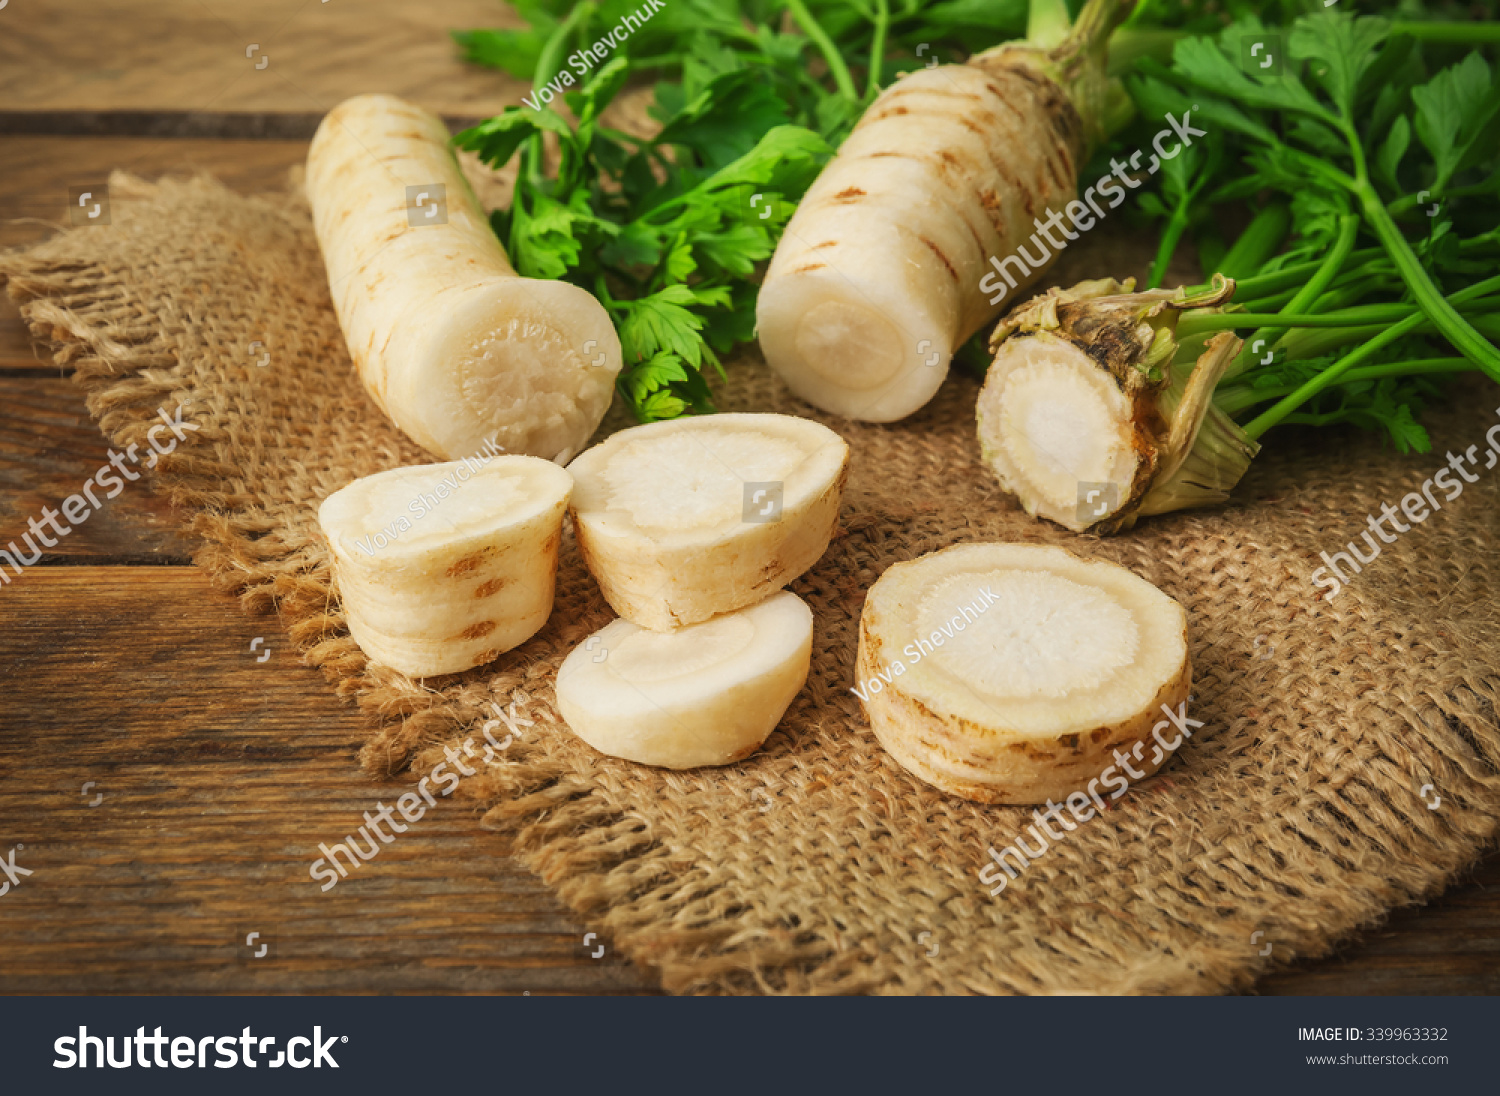 raw and choped parsley root #339963332